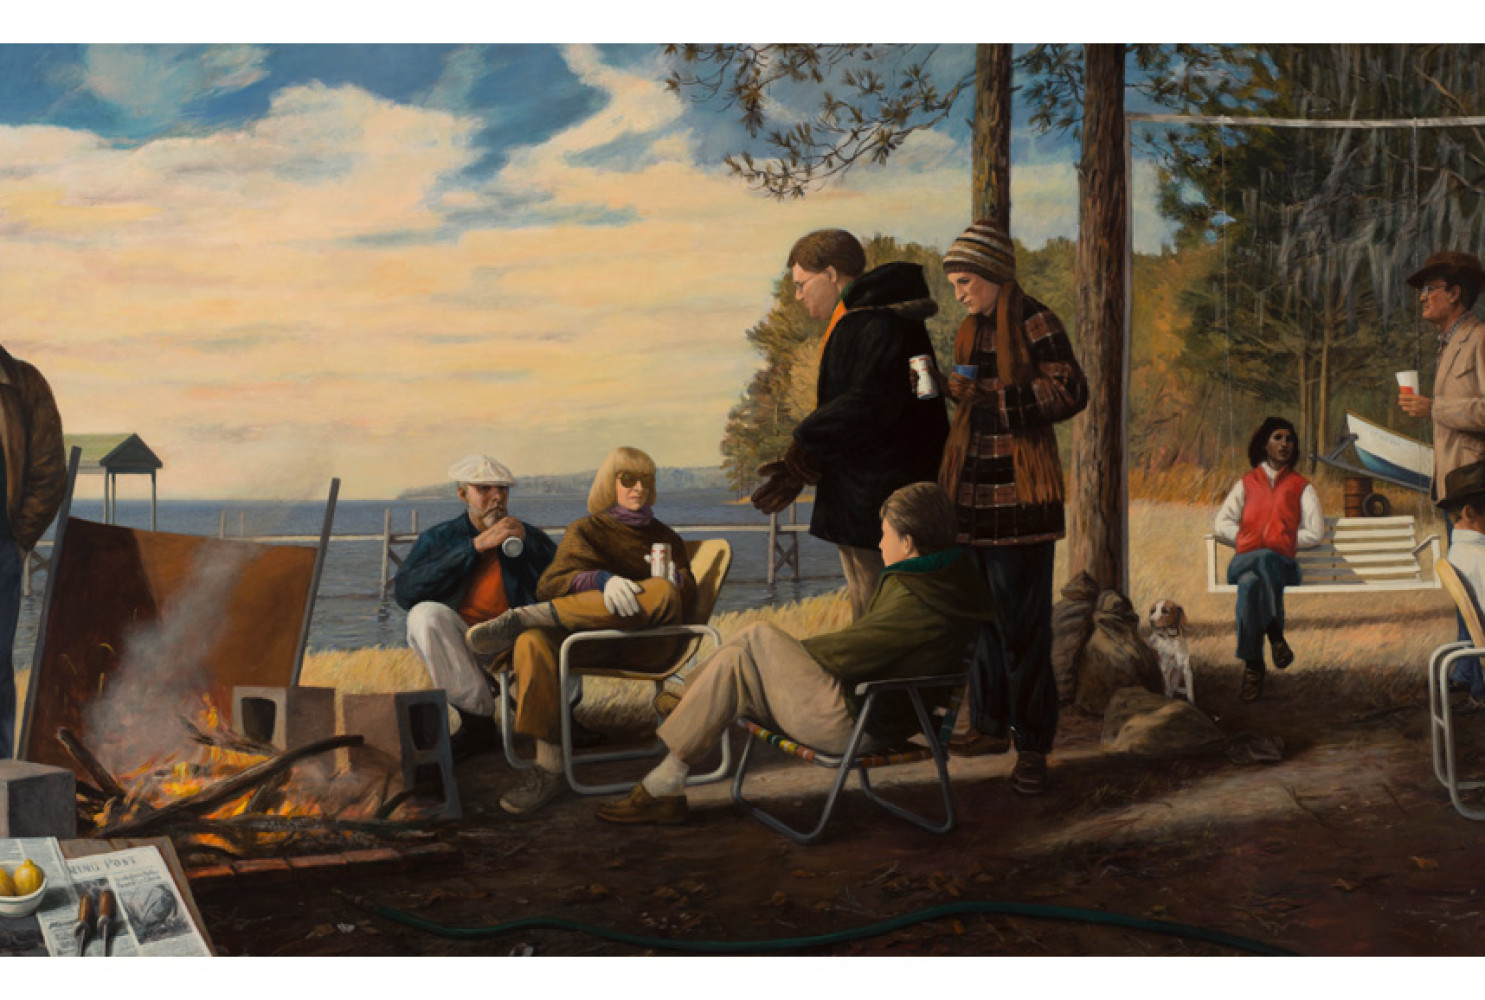 Oyster Roast, 1985-86; By Manning Williams (American, 1939-2012); 71 1/4 x 142 1/2 inches; Collection of the Charleston County Aviation Authority